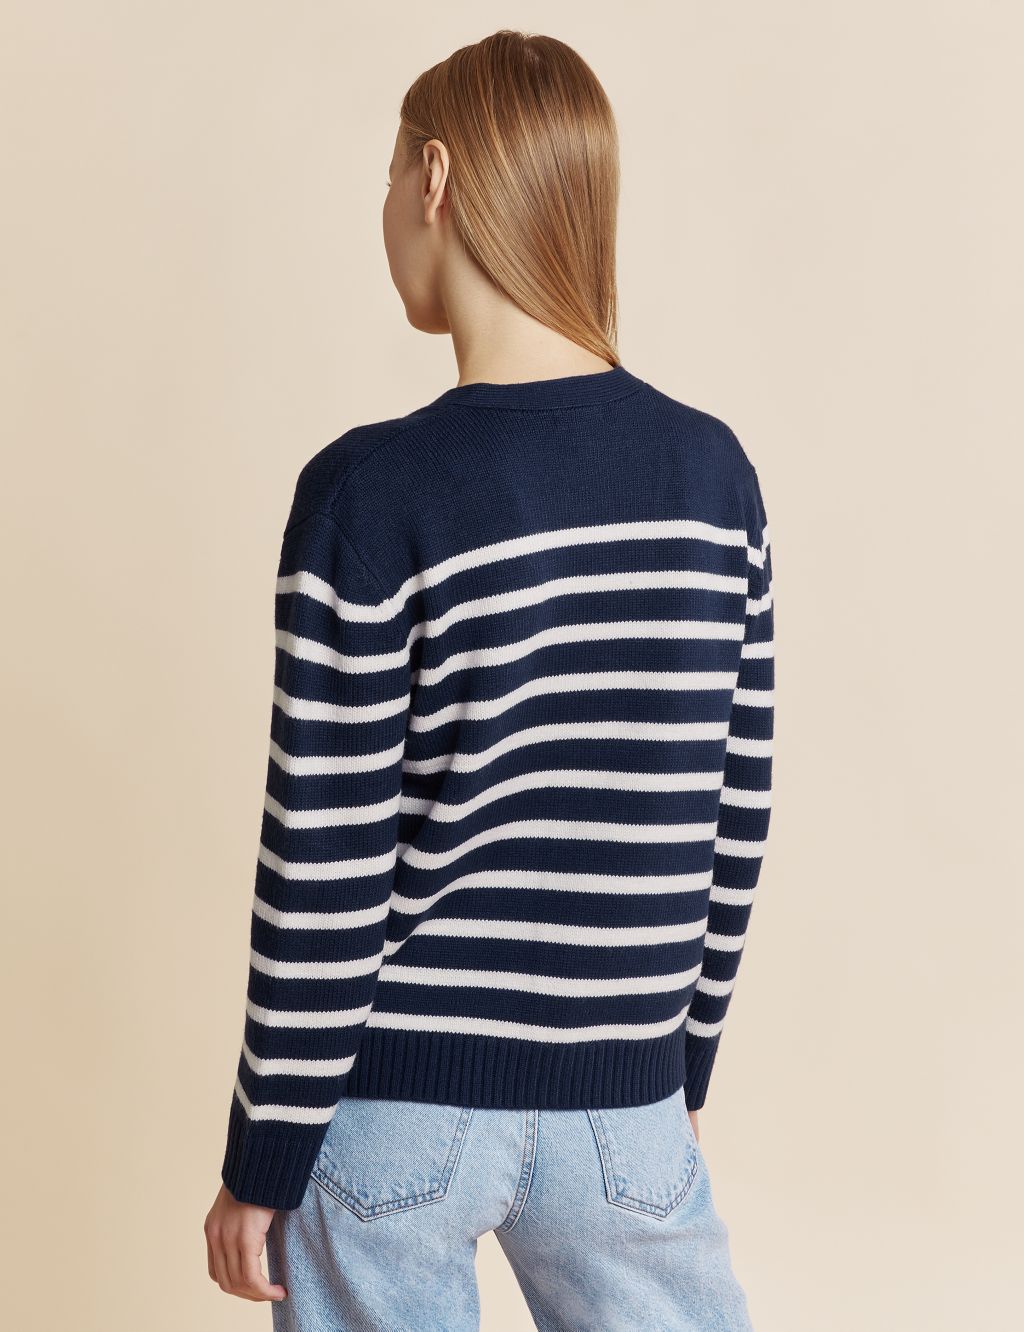 Striped V-Neck Cardigan with Wool image 2